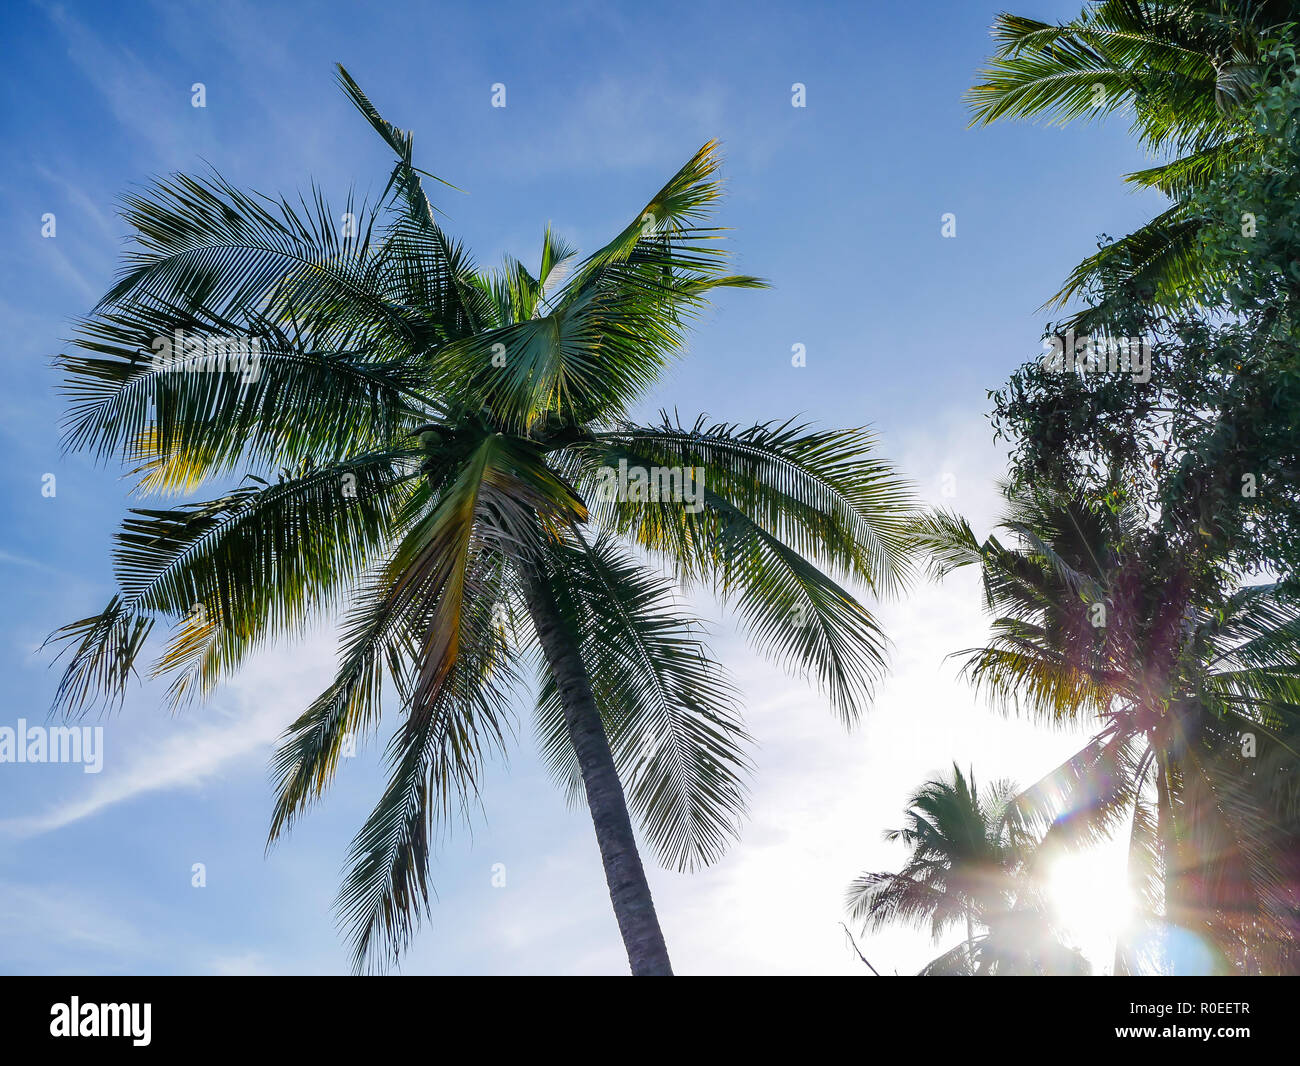 A palm tree in Indonesia - Lombok. Stock Photo